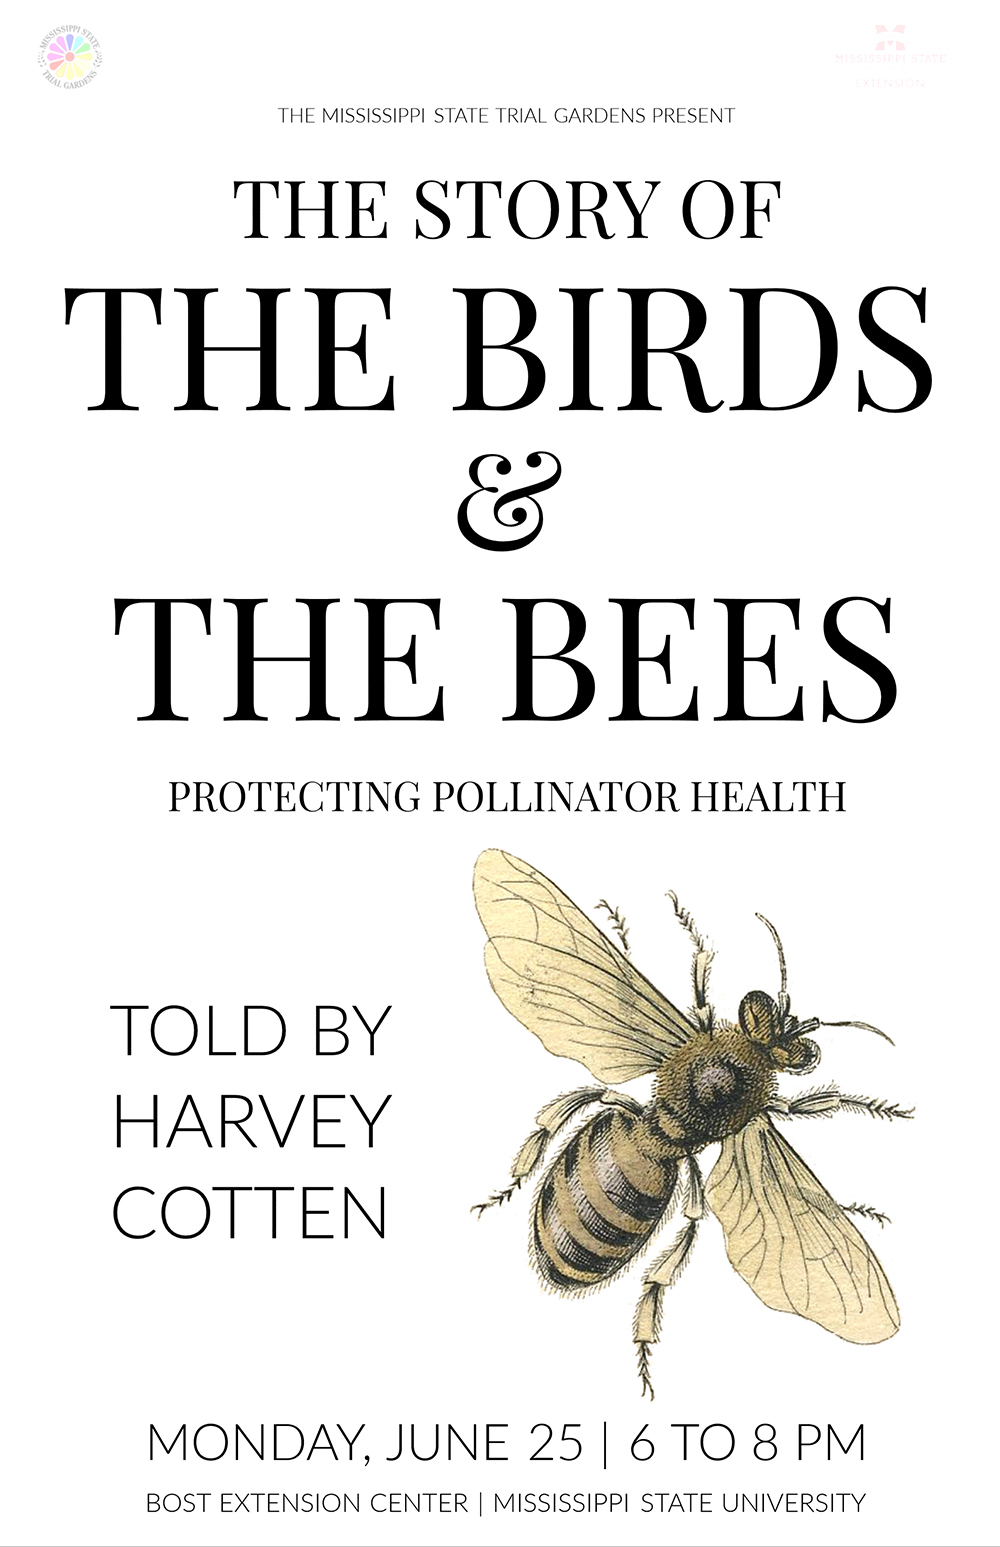 The Story of The Birds and the Bees